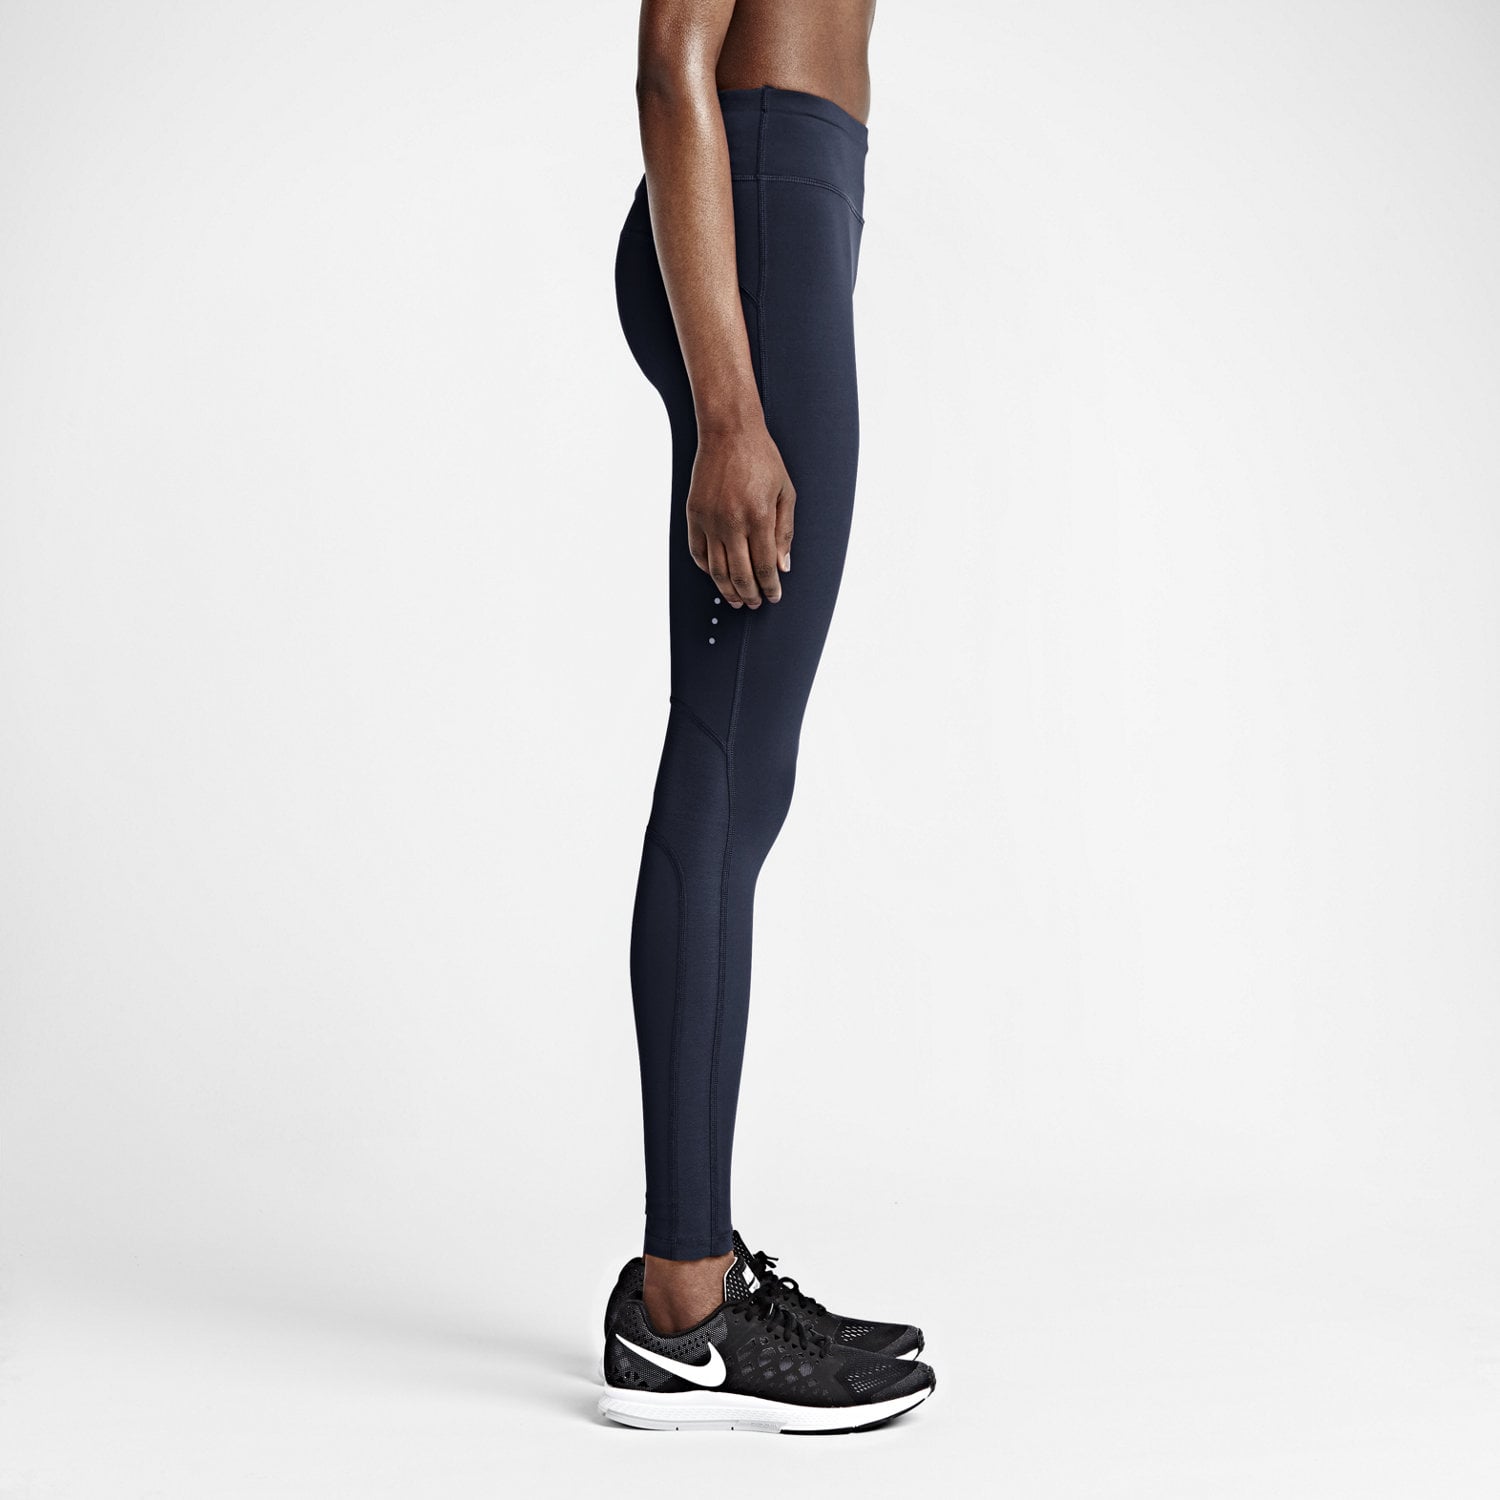 Nike Epic Lux Leggings | If You Buckets, These Are the 15 Pieces of Activewear You Need in Your Life | POPSUGAR Fitness 16